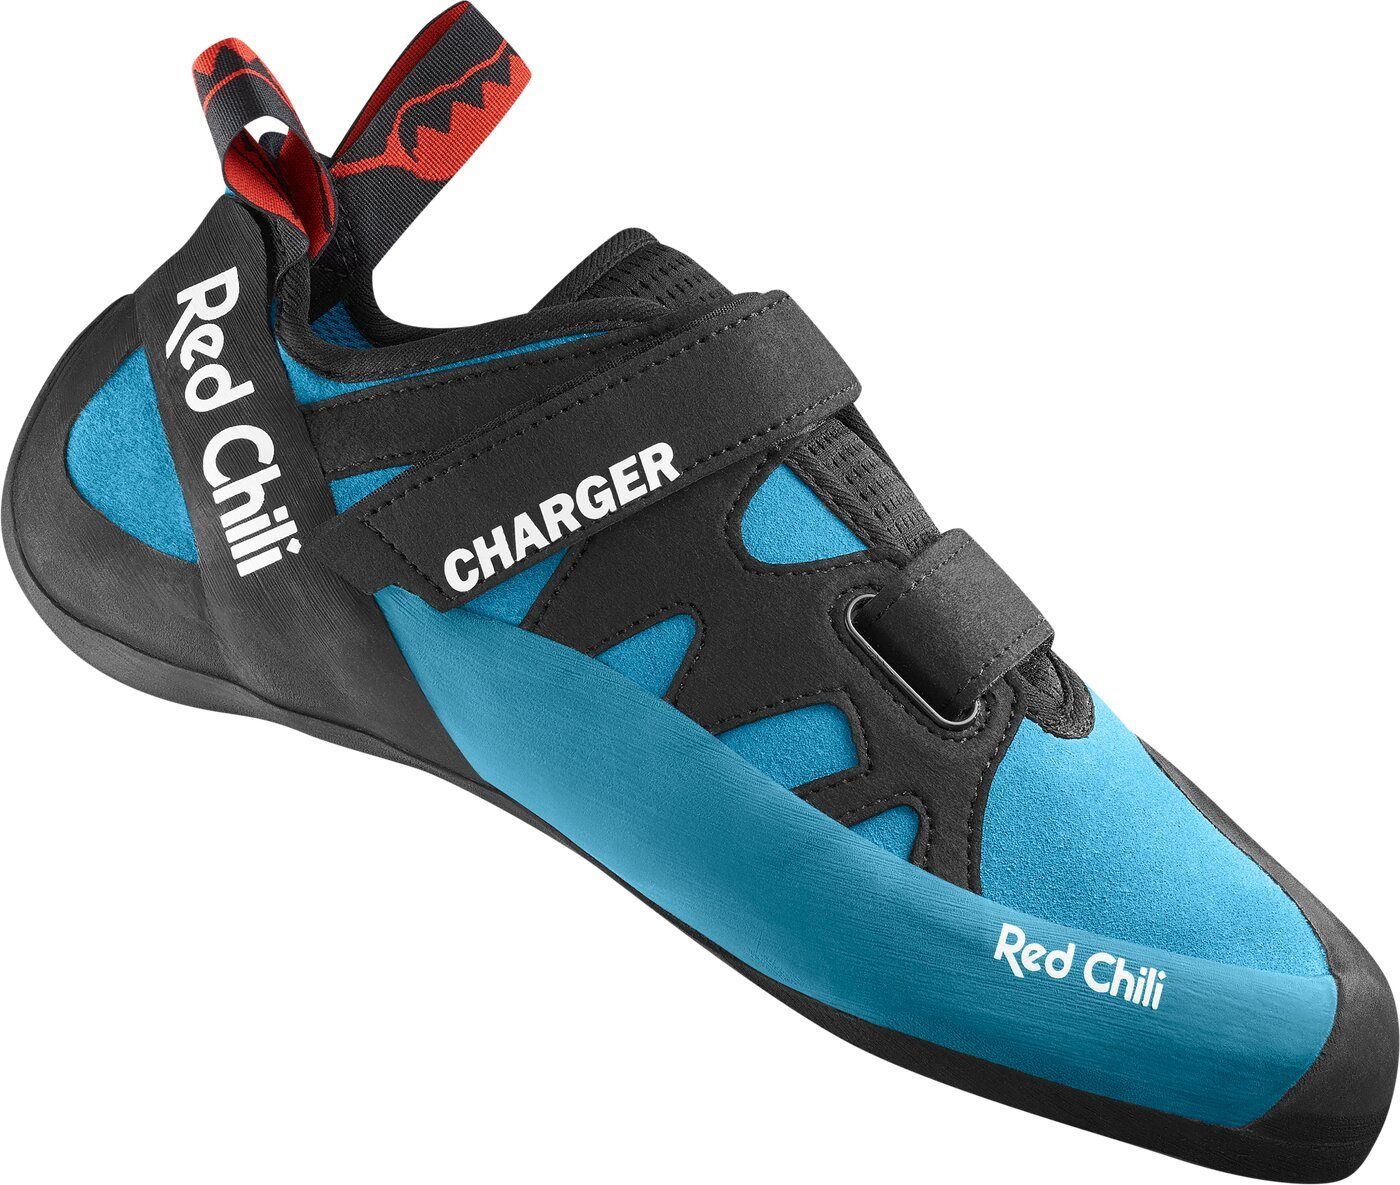 INKBLUE Charger Kletterschuh Chili Red